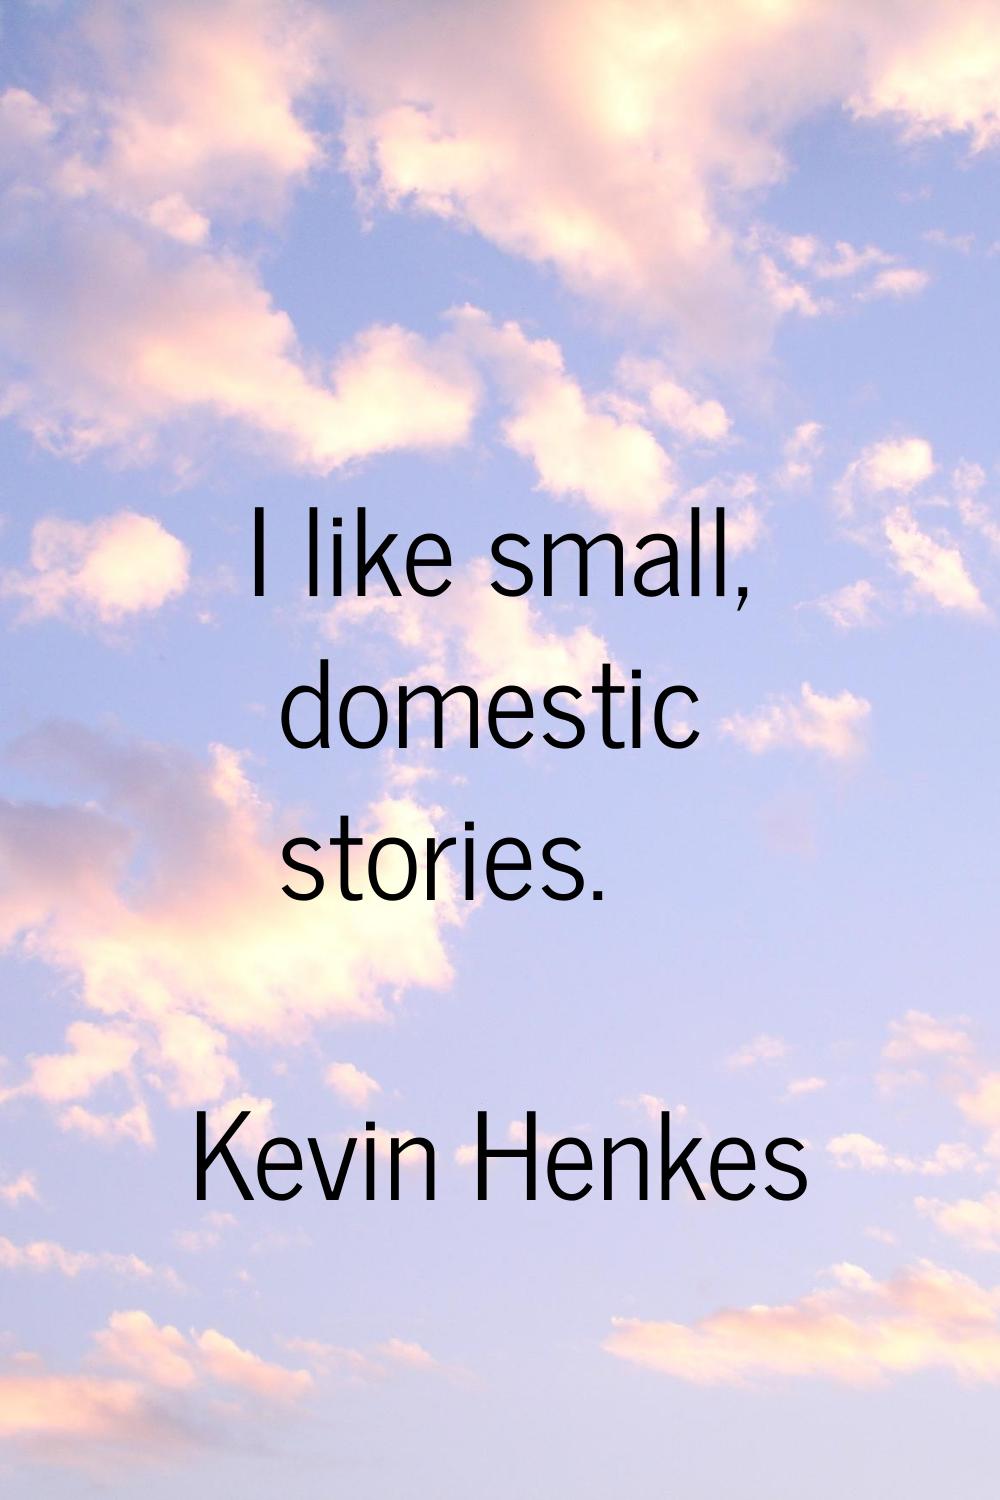 I like small, domestic stories.